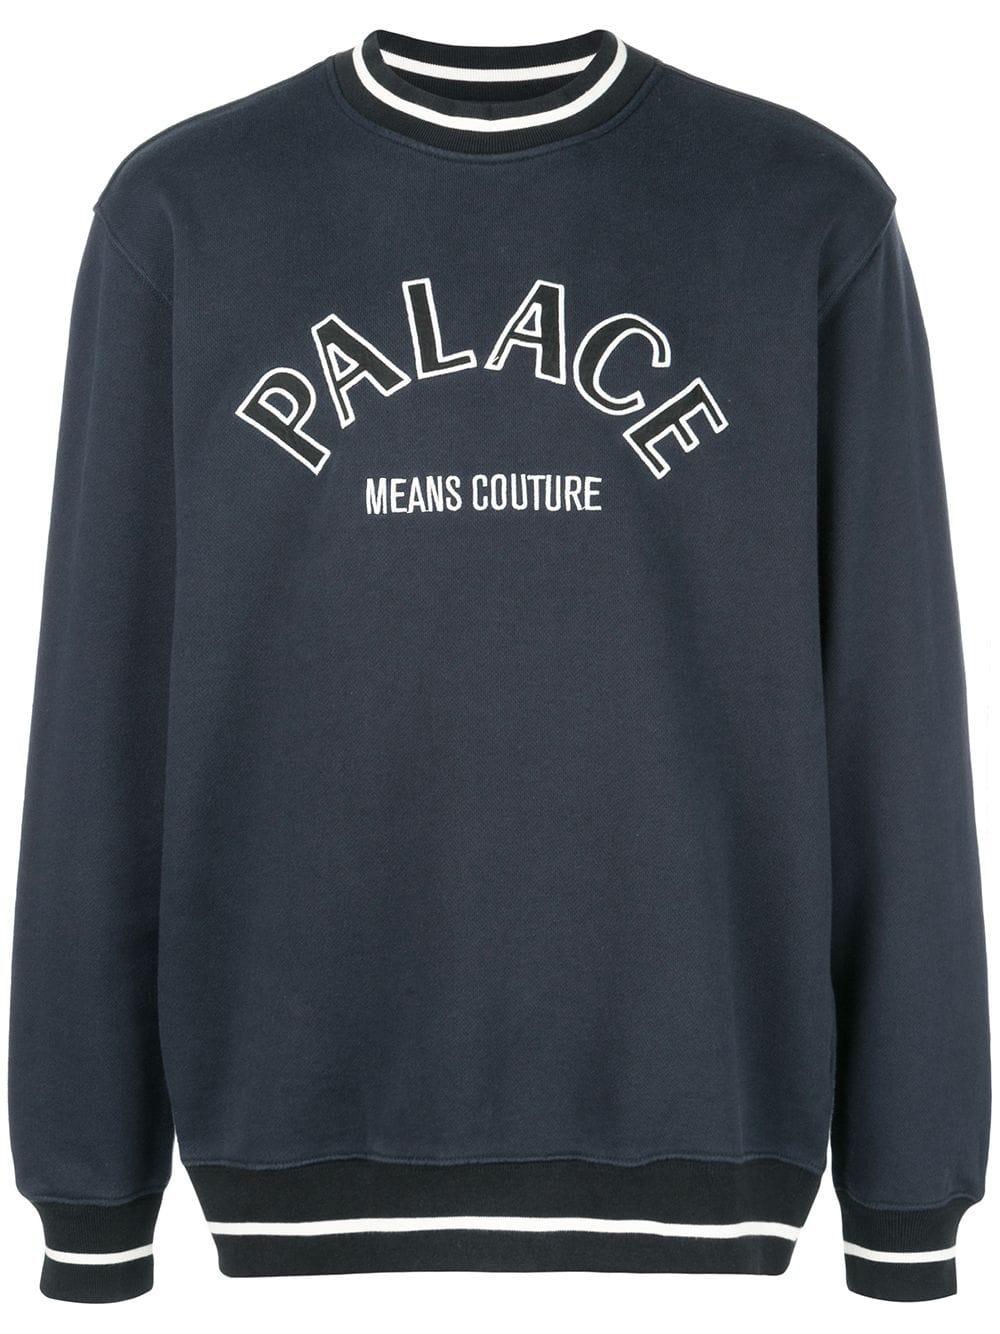 Palace Logo Embroidered Sweatshirt in Grey (Gray) for Men - Lyst